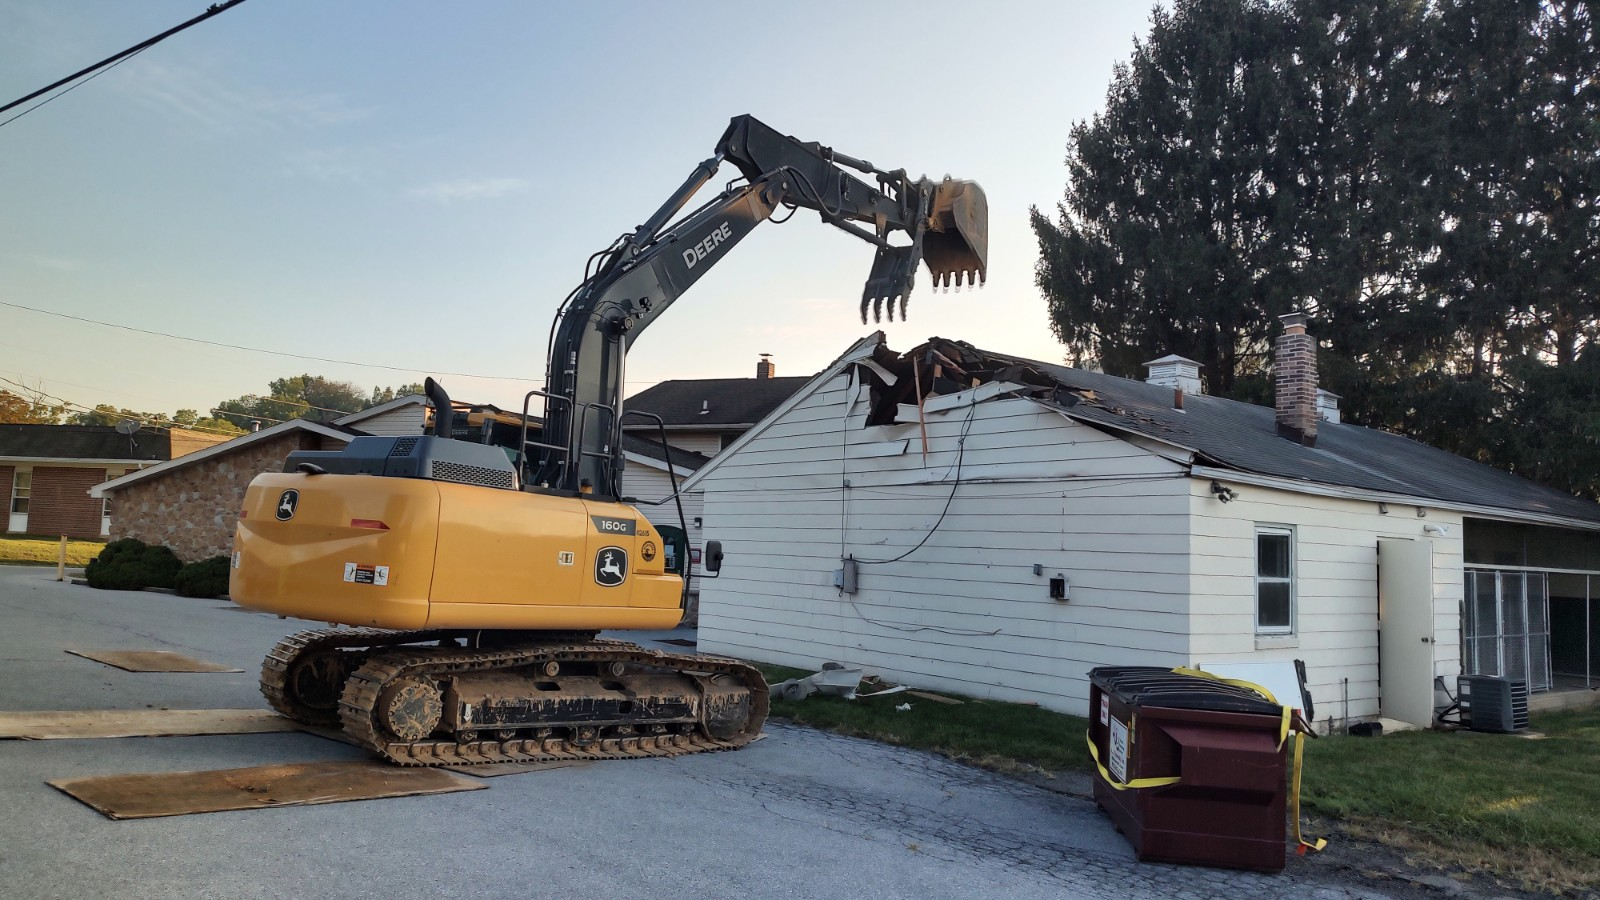 A yellow excavator is demolishing a white house.